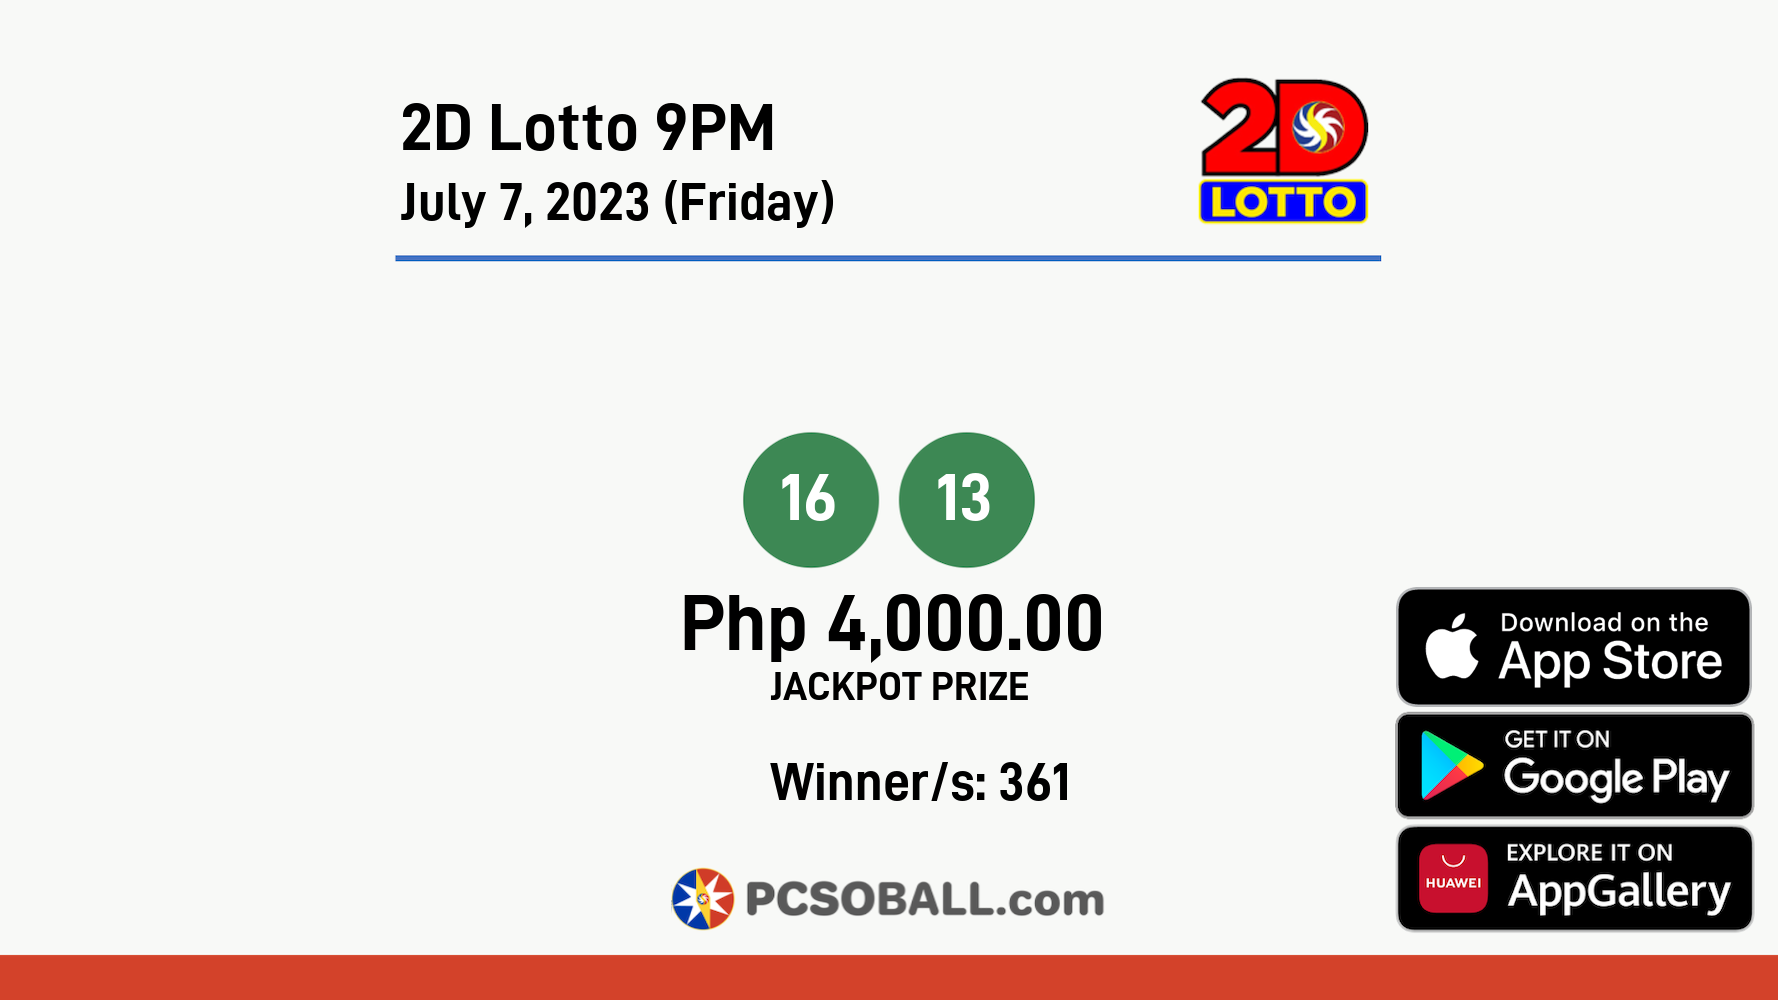 2D Lotto 9PM July 7, 2023 (Friday) Result